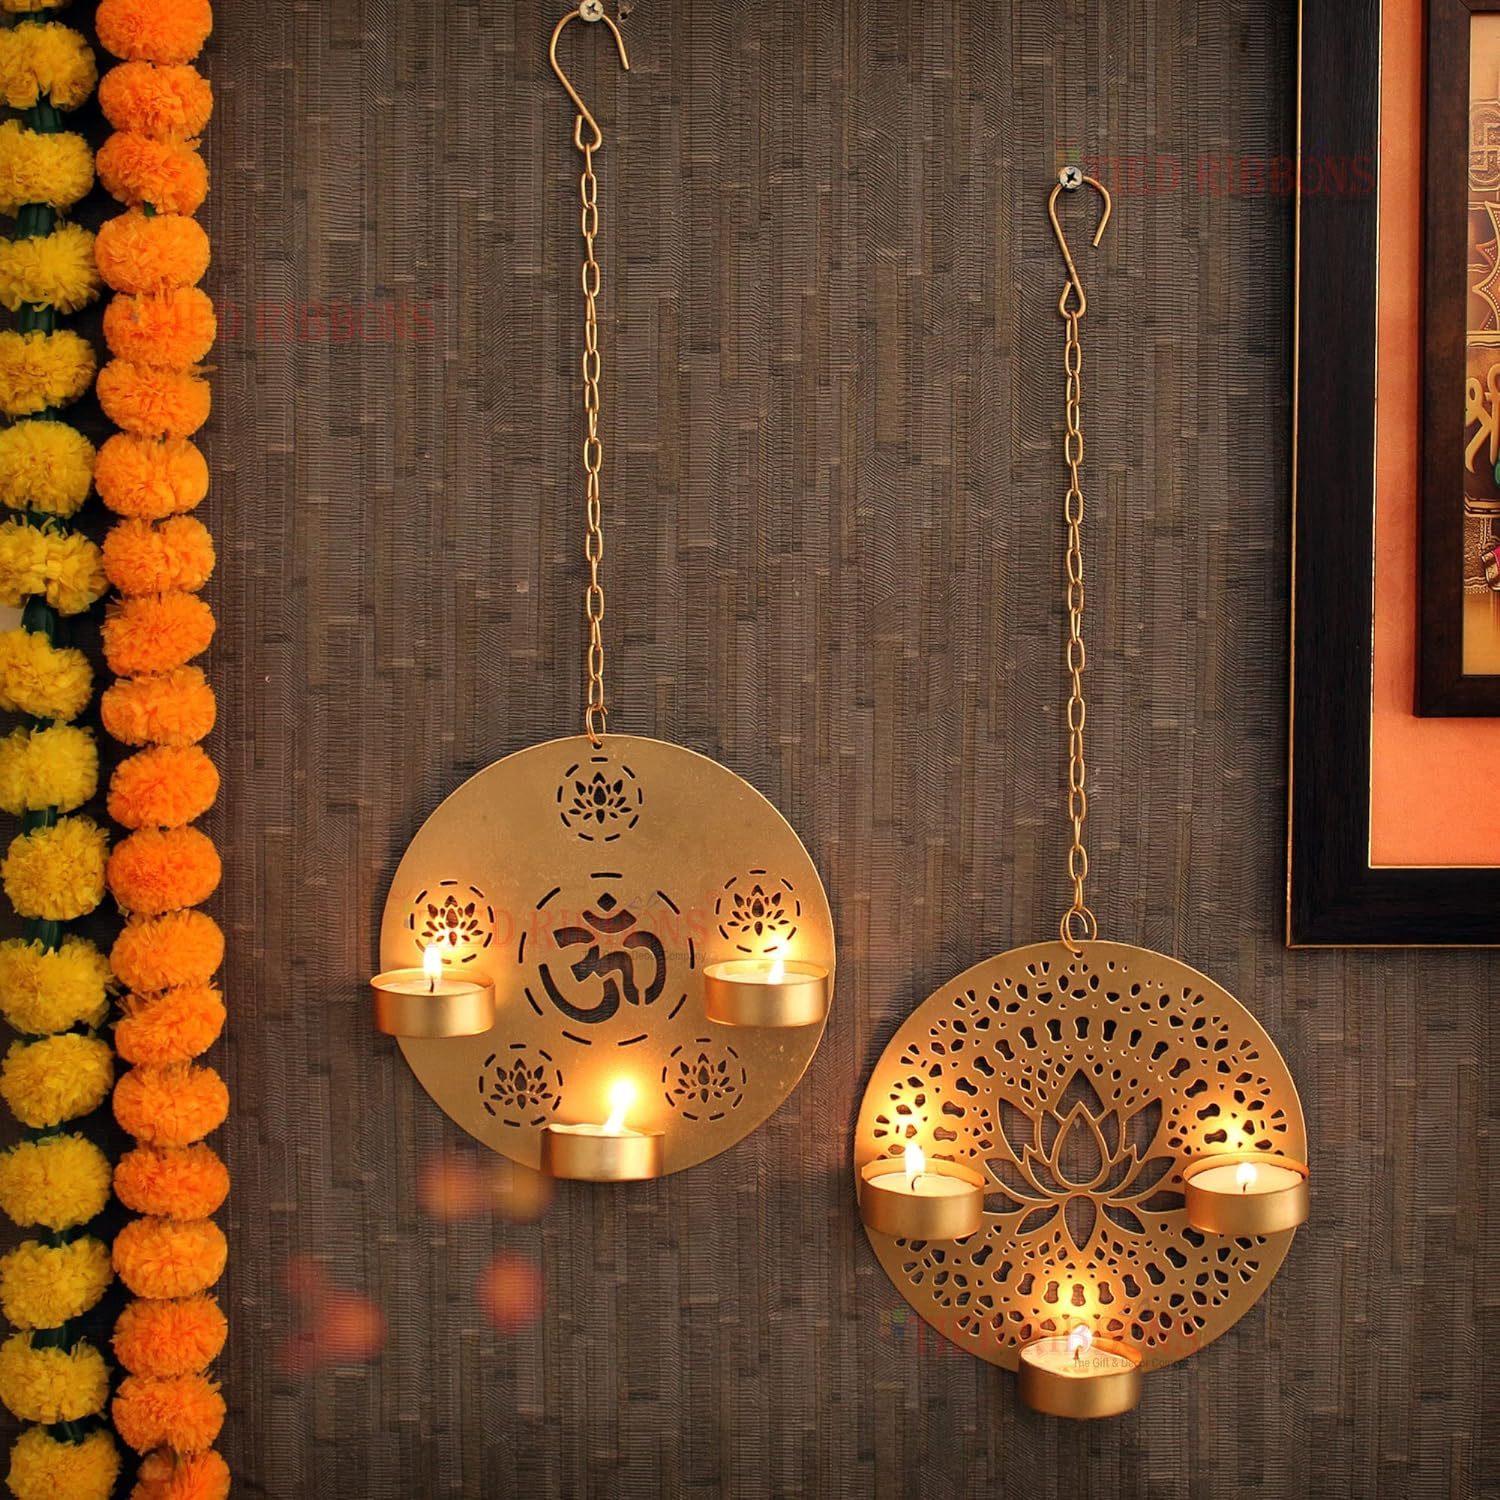 Metal Wall Hanging Tealight Candle Holders for Diwali Decor